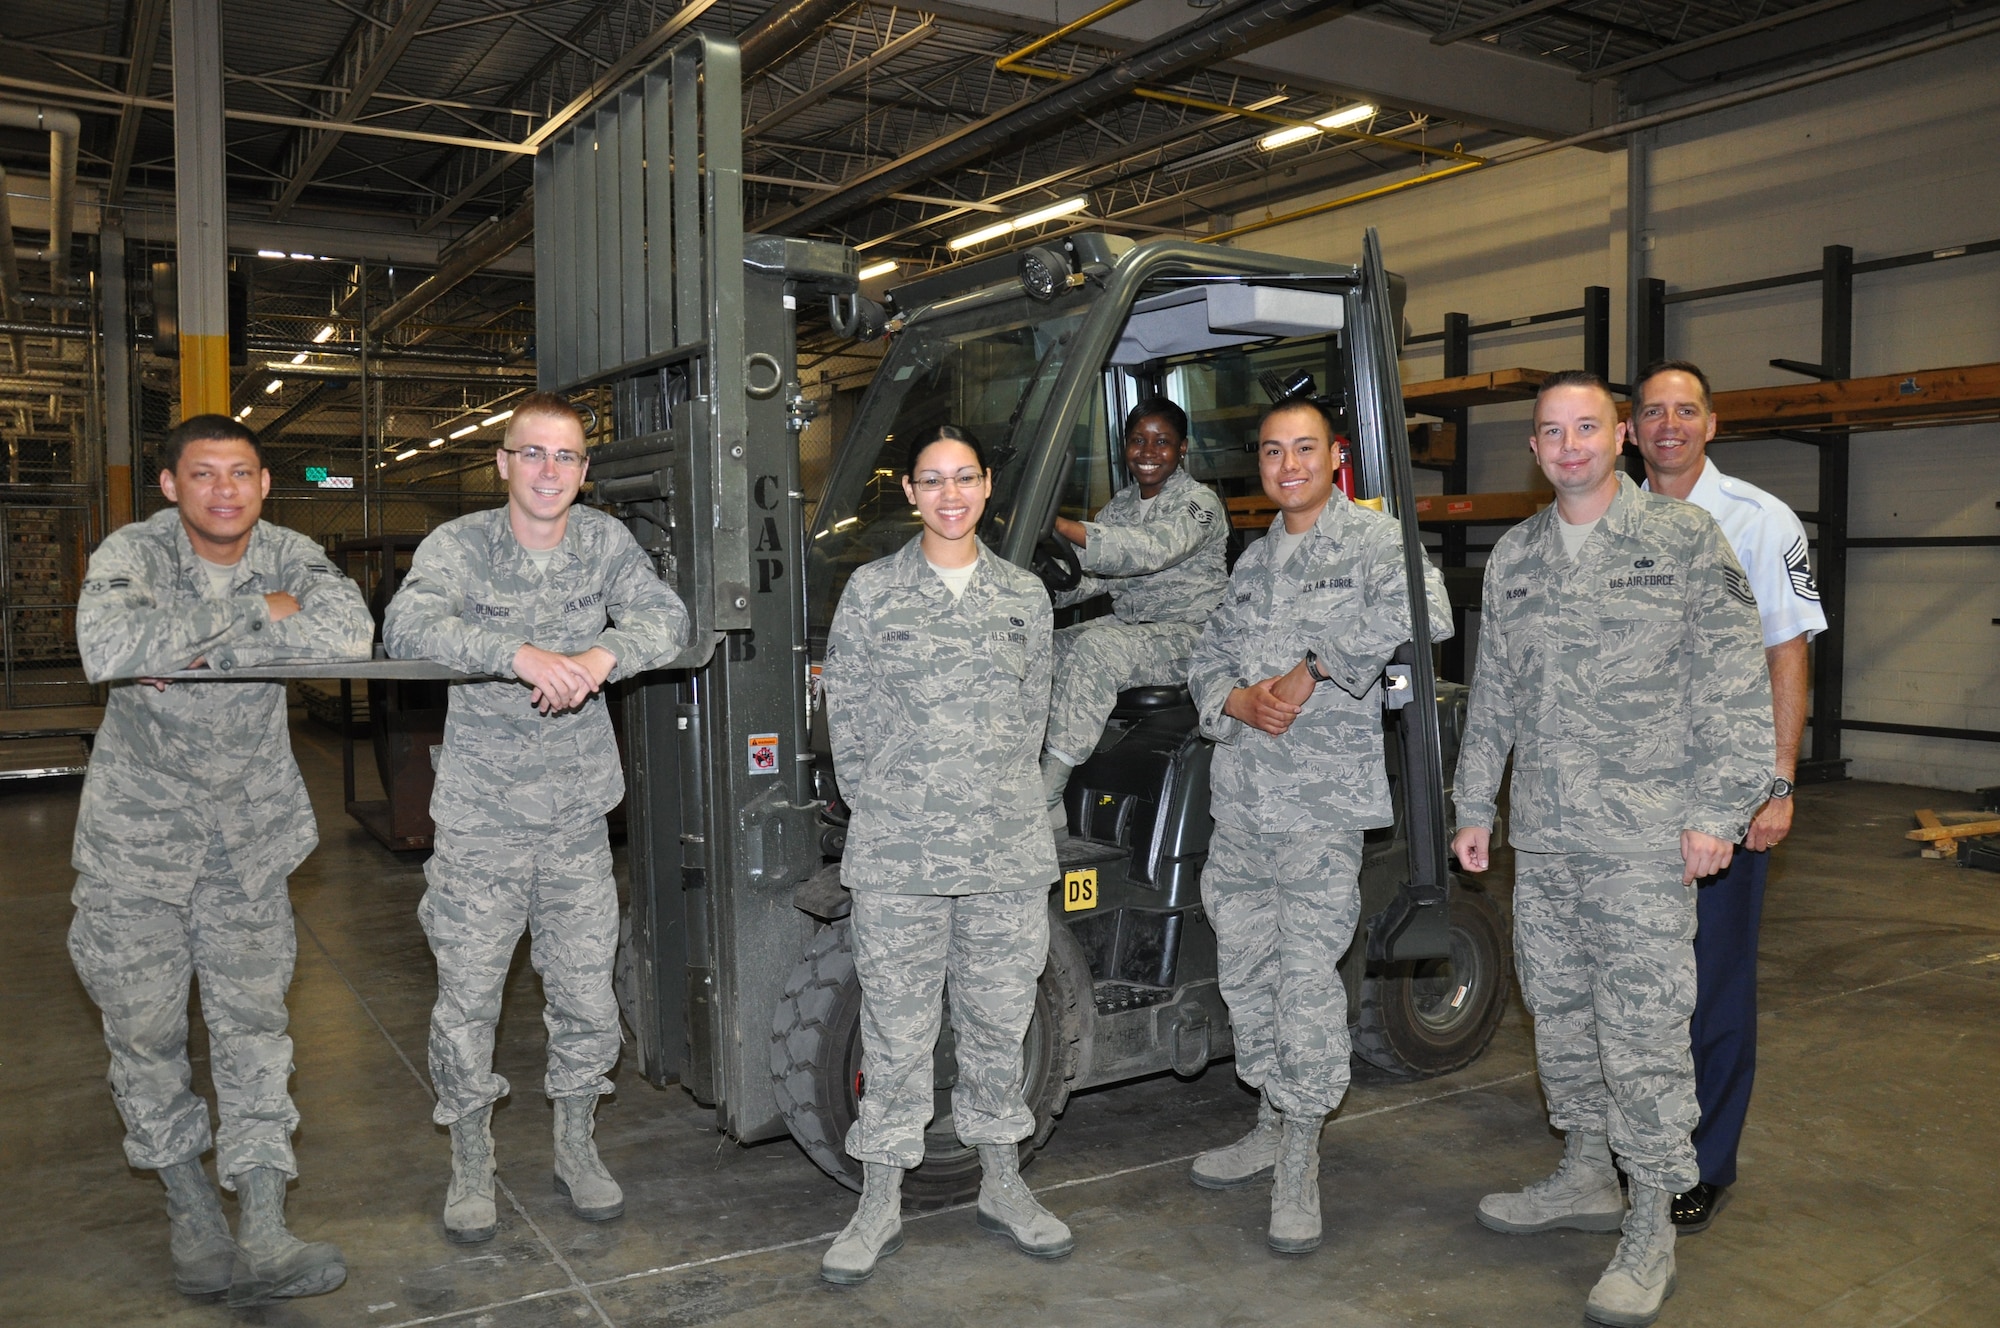 Within the 5th Logistics Readiness Squadron's Materiel Management Flight, the Maintenance Support Section consists of the Flight Service Center and Maintenance Supply Liaison elements.  Flight Service Center recovers and forwards all due-in-from maintenance (DIFM) assets to Air Force repair facilities, Defense Reutilization & Marketing Office (DRMO) or the Air Force Repair Enhancement Program (AFREP) office for on base repair.  Maintenance Supply Liaison manages the procurement and tracking of all non mission capable (MICAP) asset requirements for the 23rd and 69th Bomb Squadrons."

Names starting from the left:

A1C Bell, Amn Olinger, A1C Harris, SSgt Taggart, A1C Escobar, TSgt Olson and Chief--Not pictured TSgt Williams, SSgt Lindsey, SSgt Becker

